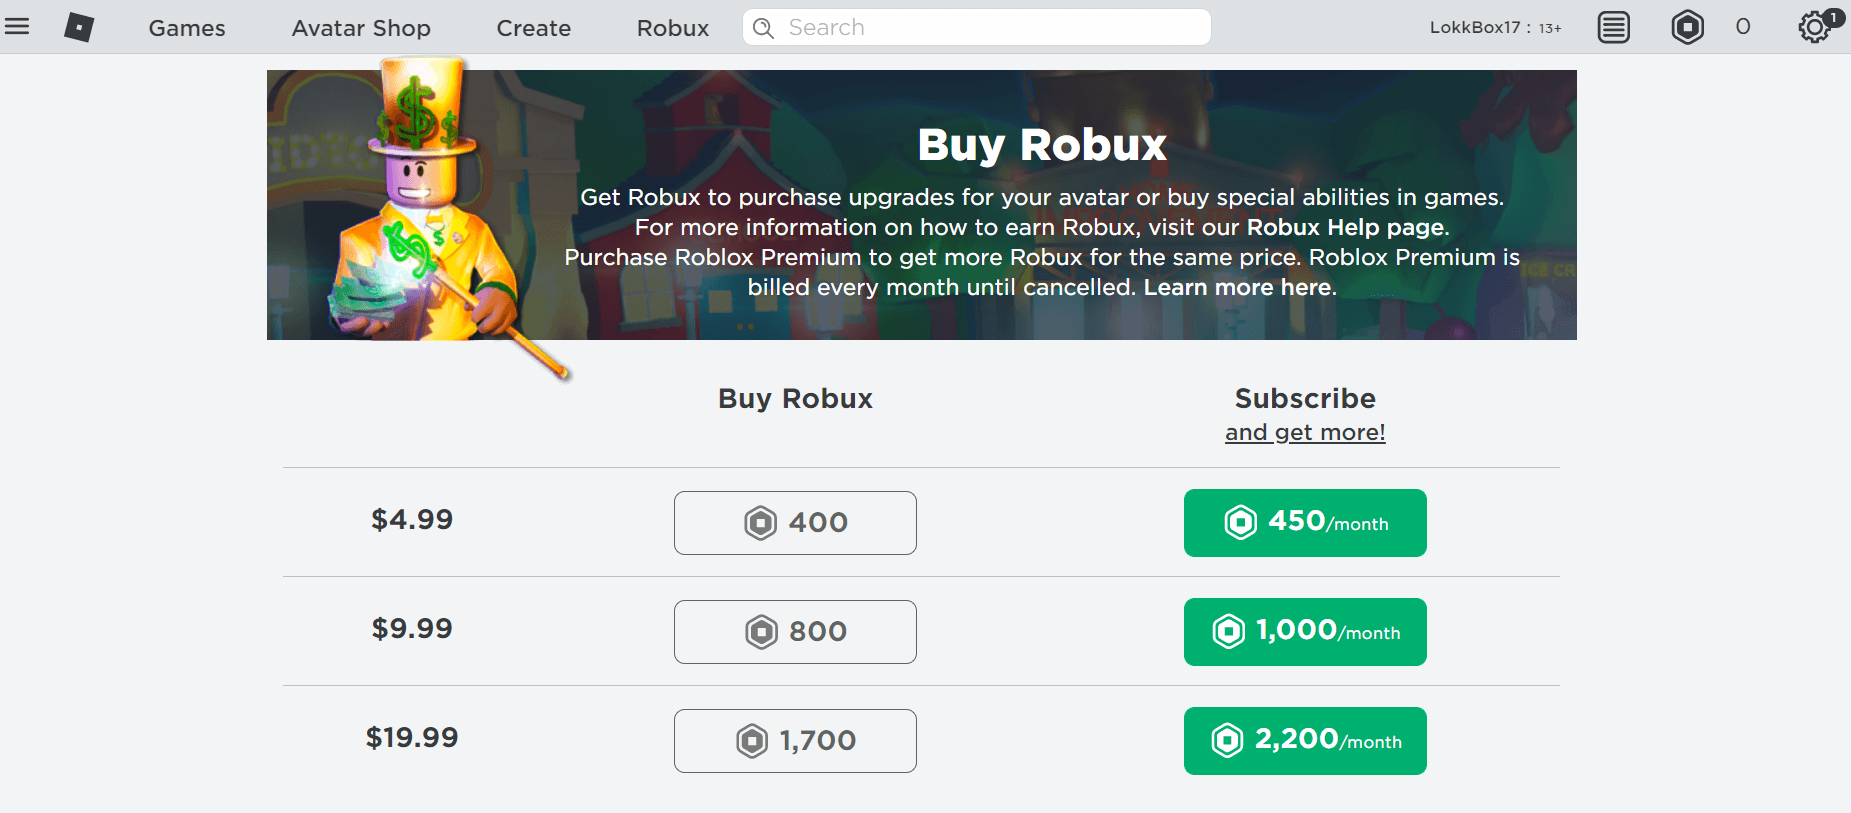 How To Gift Robux To Friends